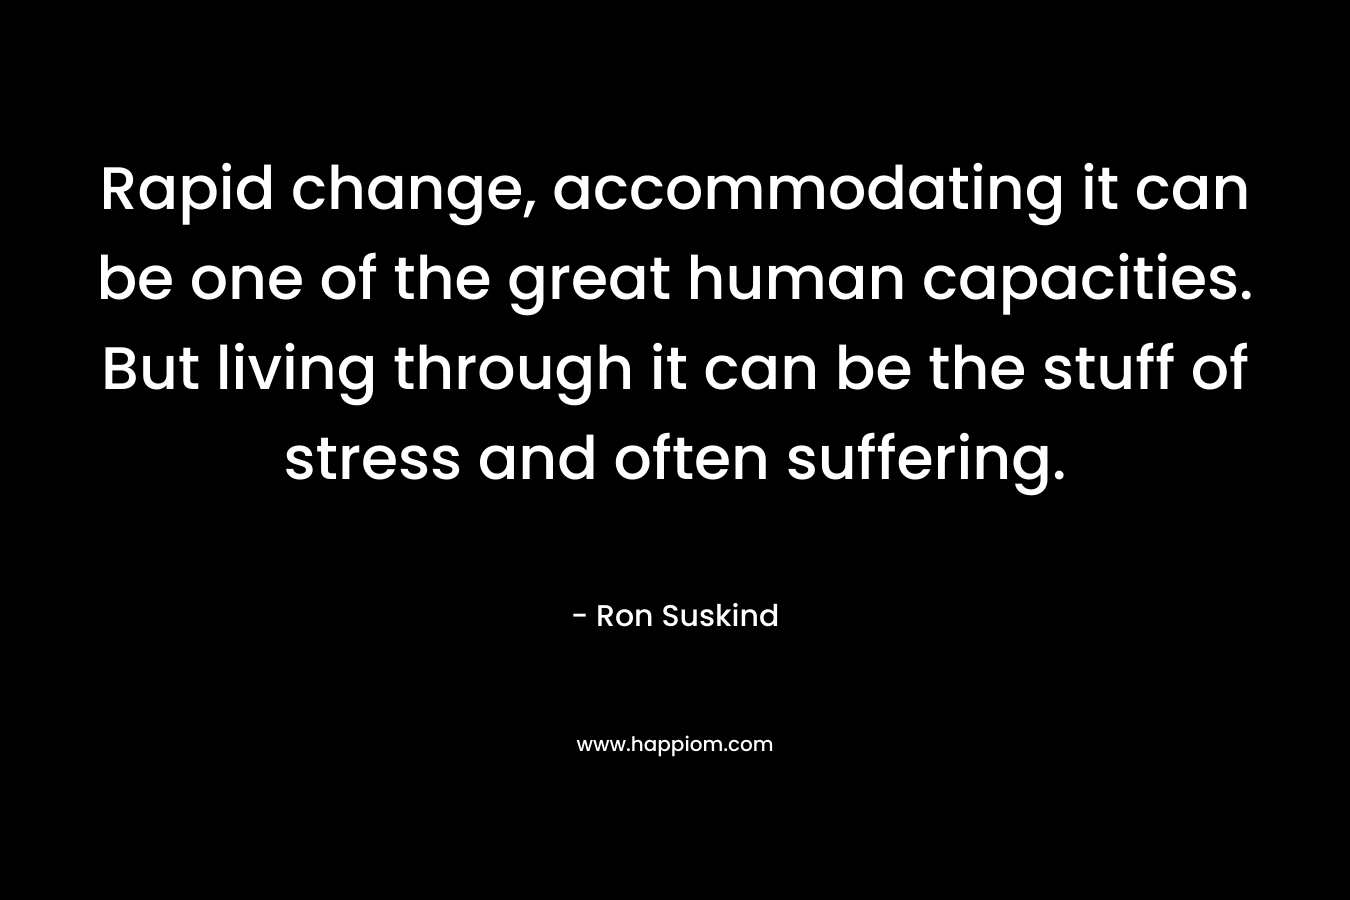 Rapid change, accommodating it can be one of the great human capacities. But living through it can be the stuff of stress and often suffering. – Ron Suskind